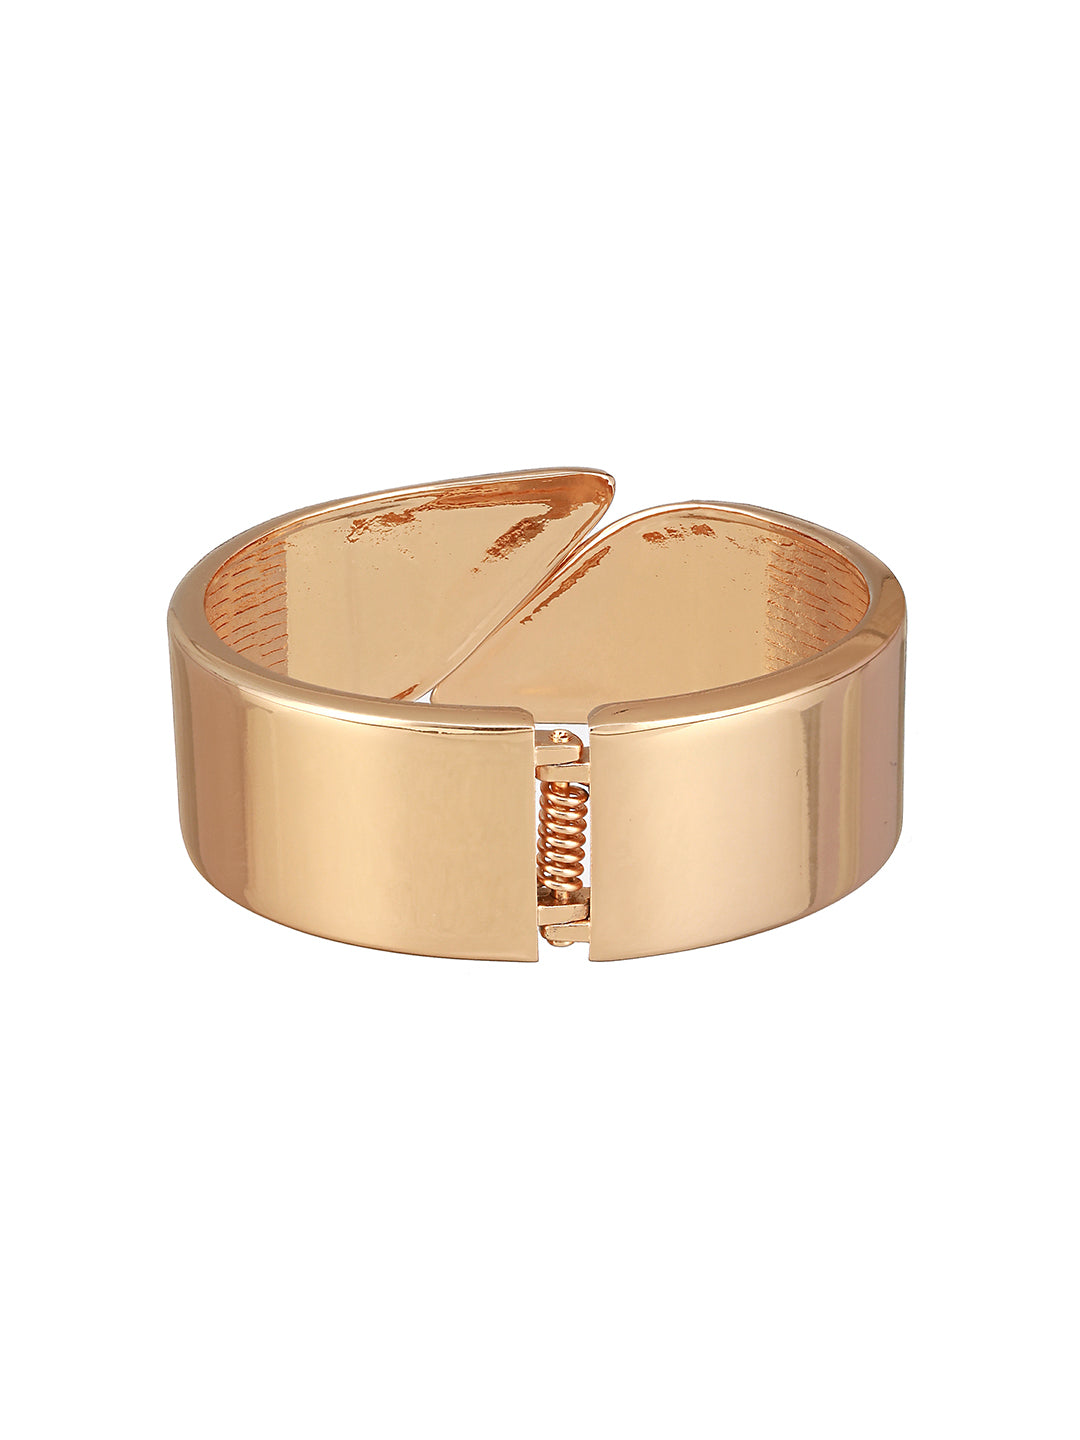 JAZZ AND SIZZLE Gold-Plated Gold -Toned Solid Cuff Bracelet - Jazzandsizzle